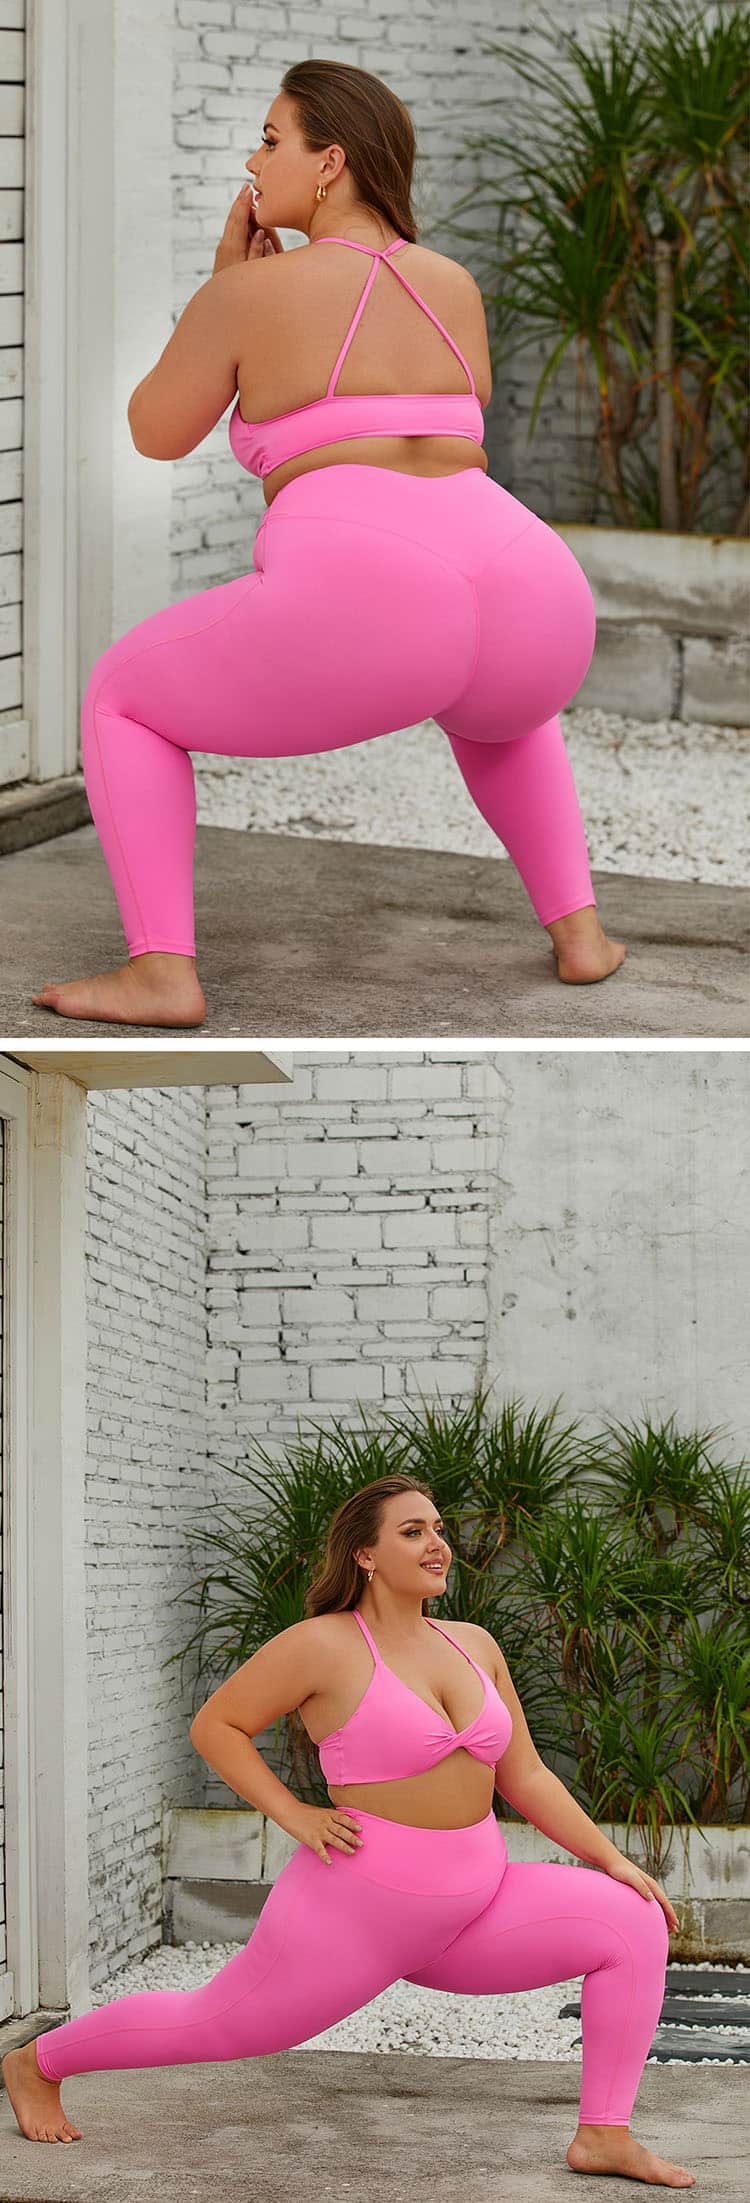 Introducing our new line of plus size sports leggings, tailored for the practical